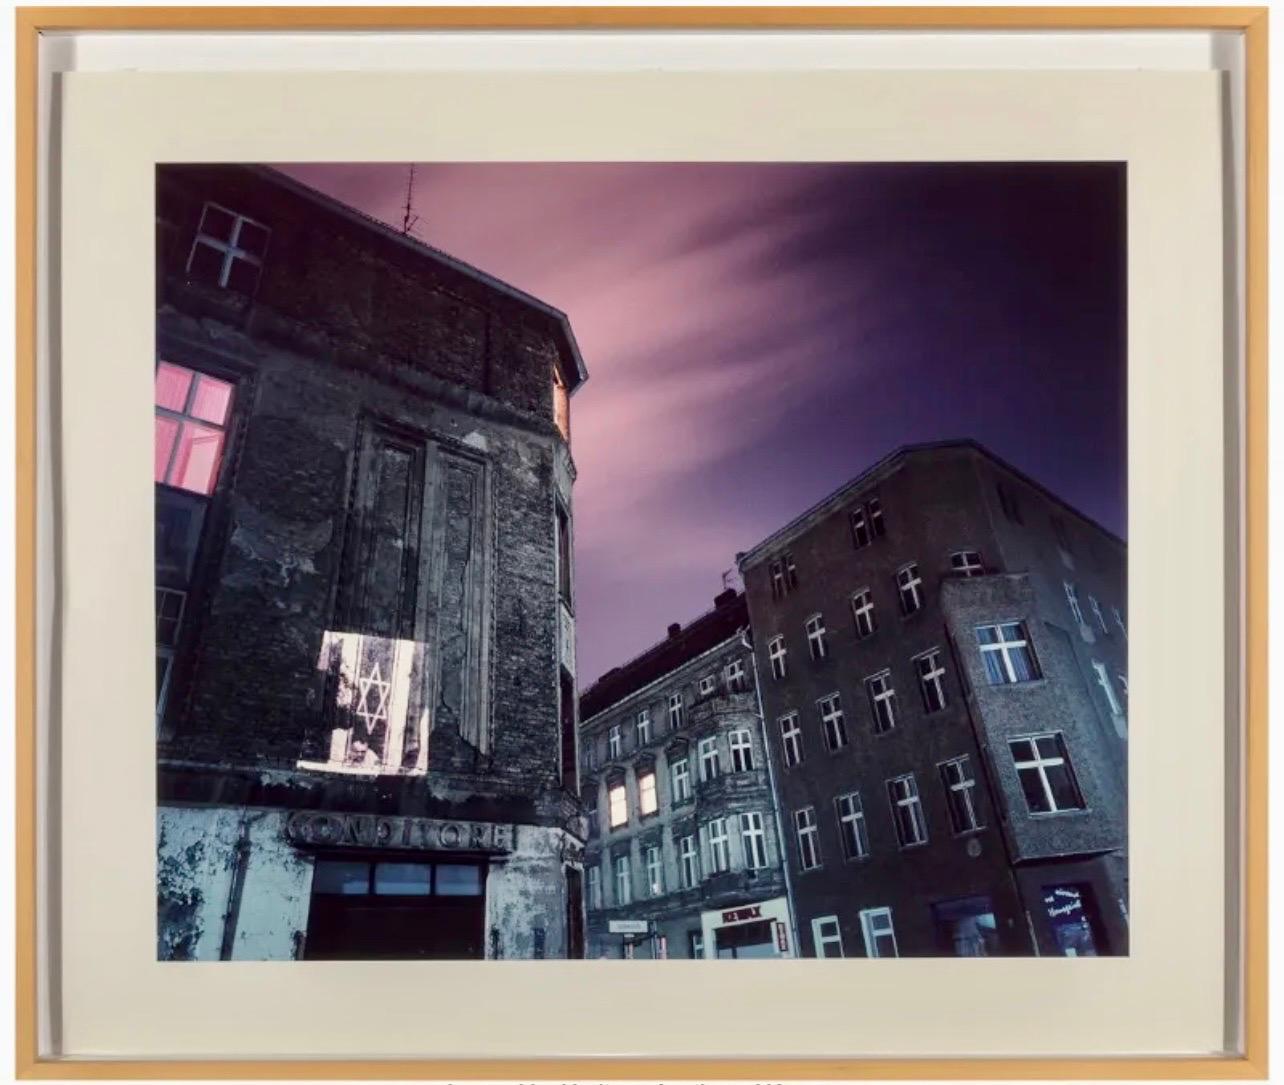 Shimon Attie (b. 1957) 
Joachimstrasse, Ecke, Auguststrasse, Berlin, 1994 
Edition 3/3
Dye coupler print on Kodak Ektacolor paper 
27 x 34 inches (68.6 x 86.4 cm) (image) 34 x 40 inches (sheet) Presents well. 
Framed Dimensions 36.25 X 42.5 

From